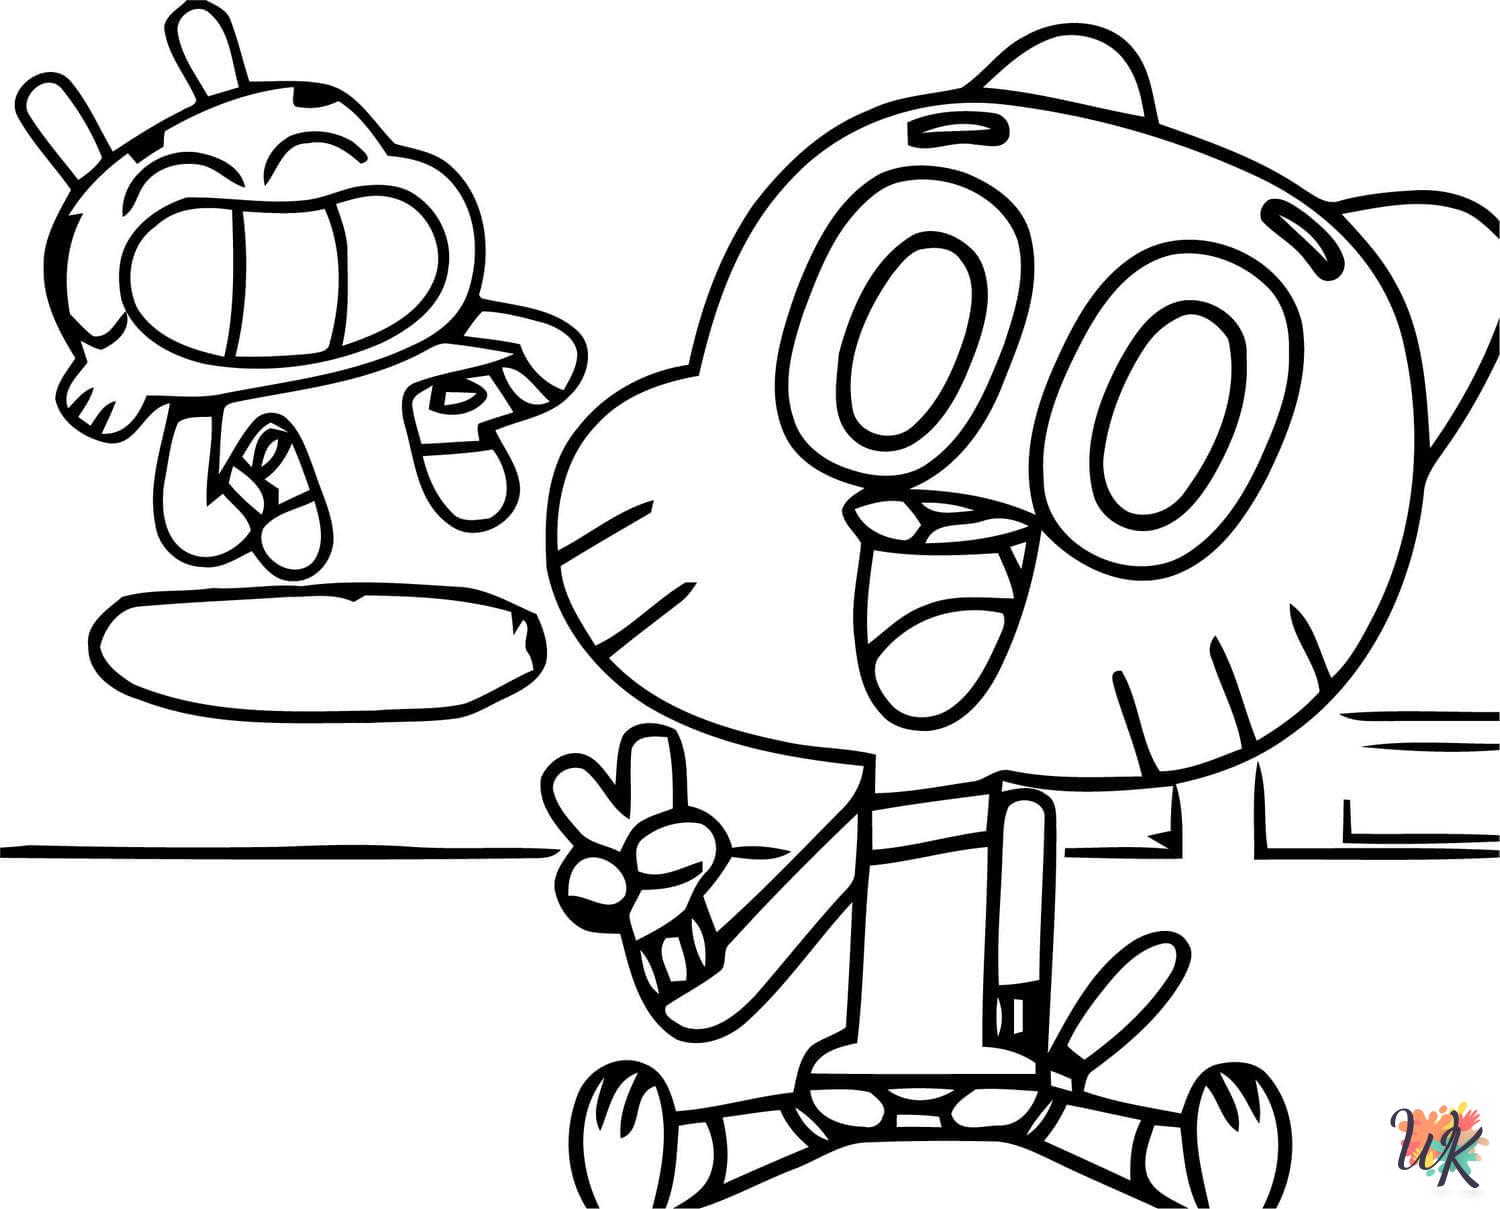 Gumball ornament coloring pages